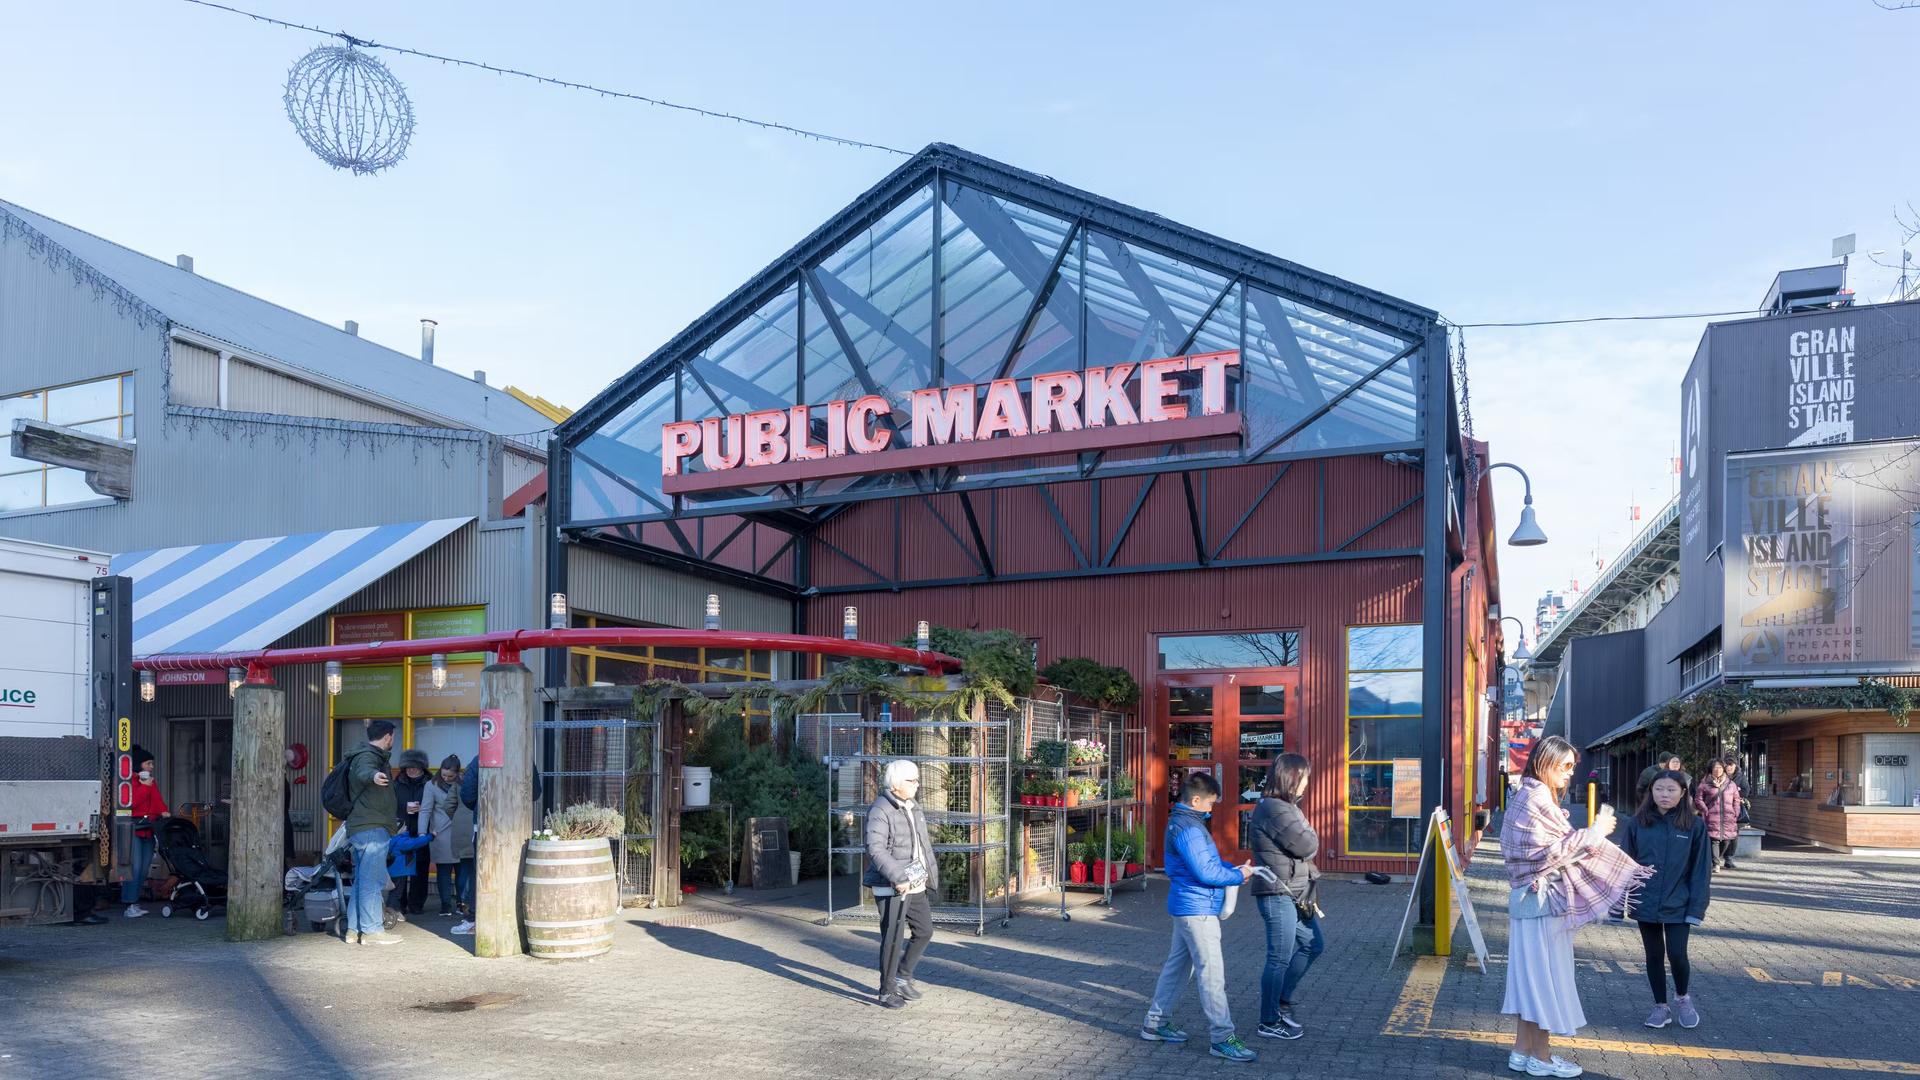 The exterior of Granville Island Public Market in Vancouver, home to over 100 vendors offering fresh seafood, meats, sweets and European specialty foods.